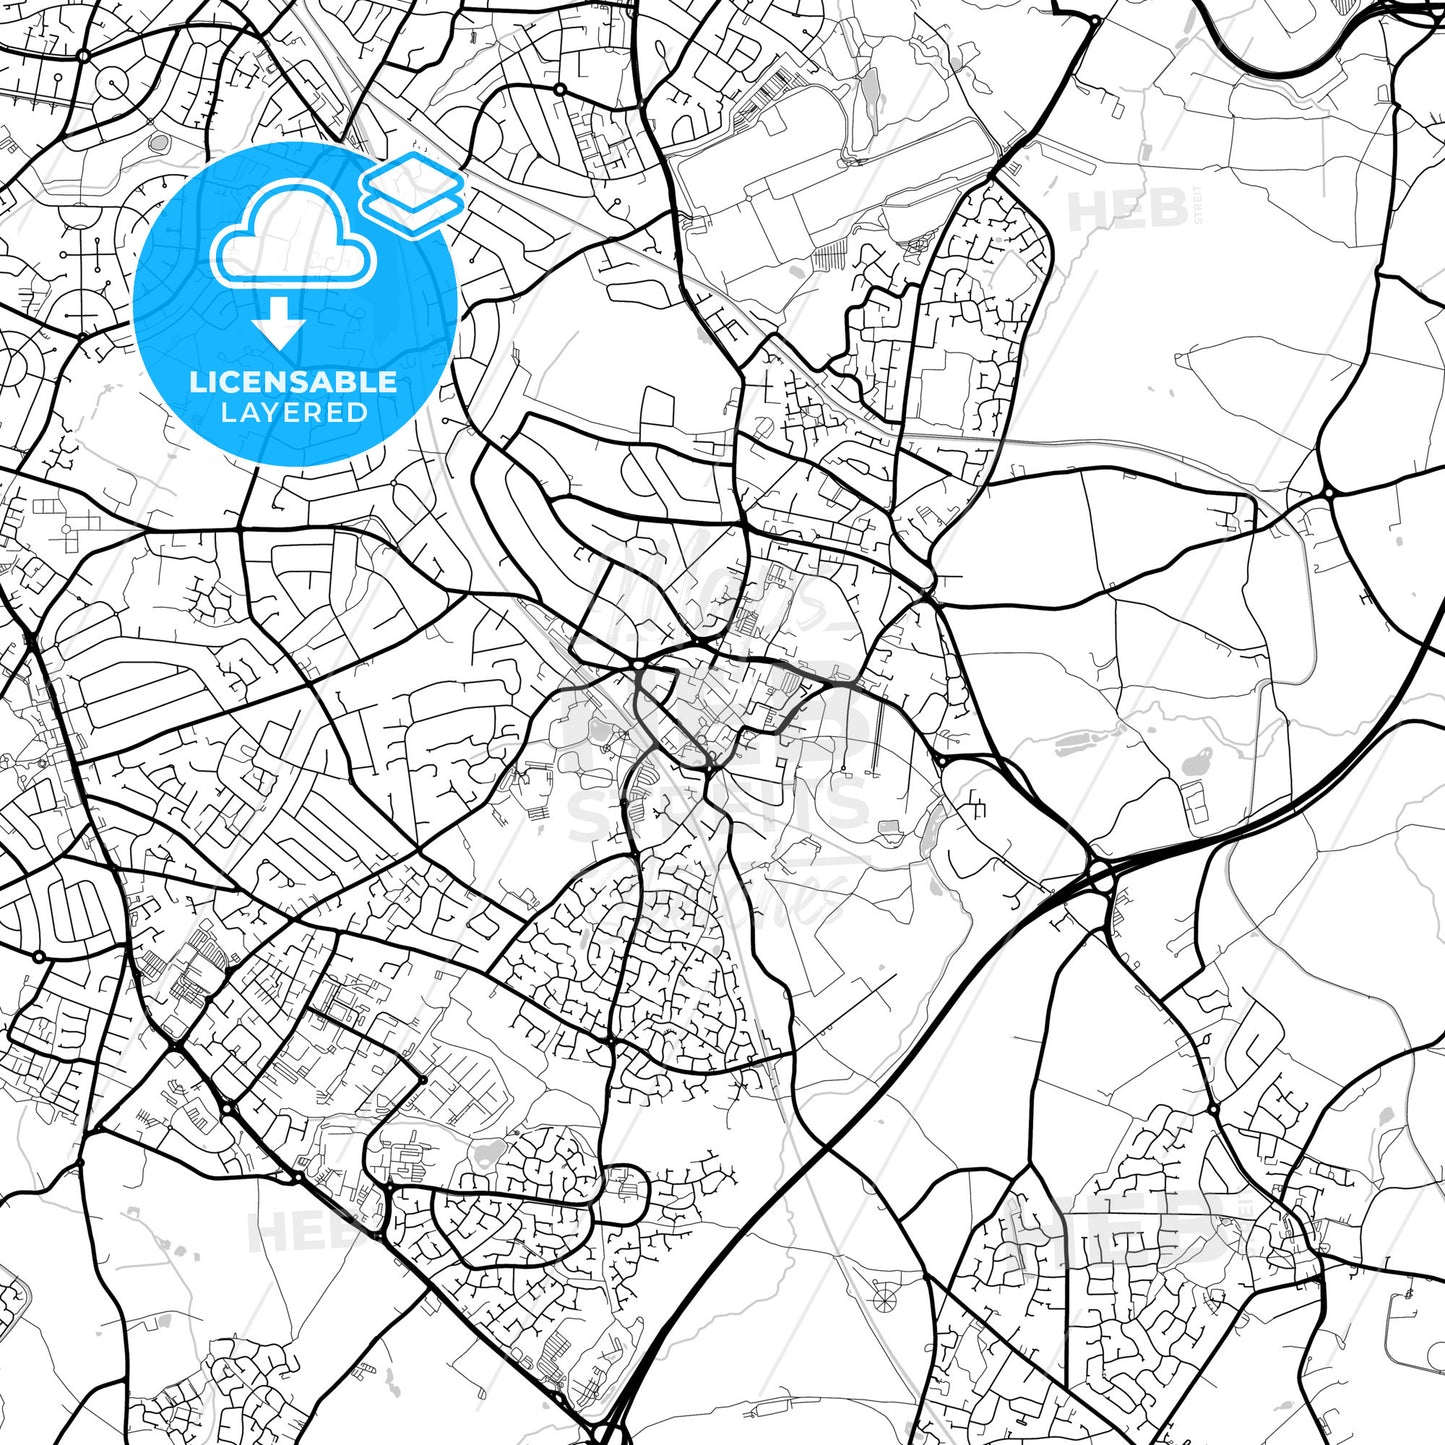 Layered PDF map of Solihull, West Midlands, England